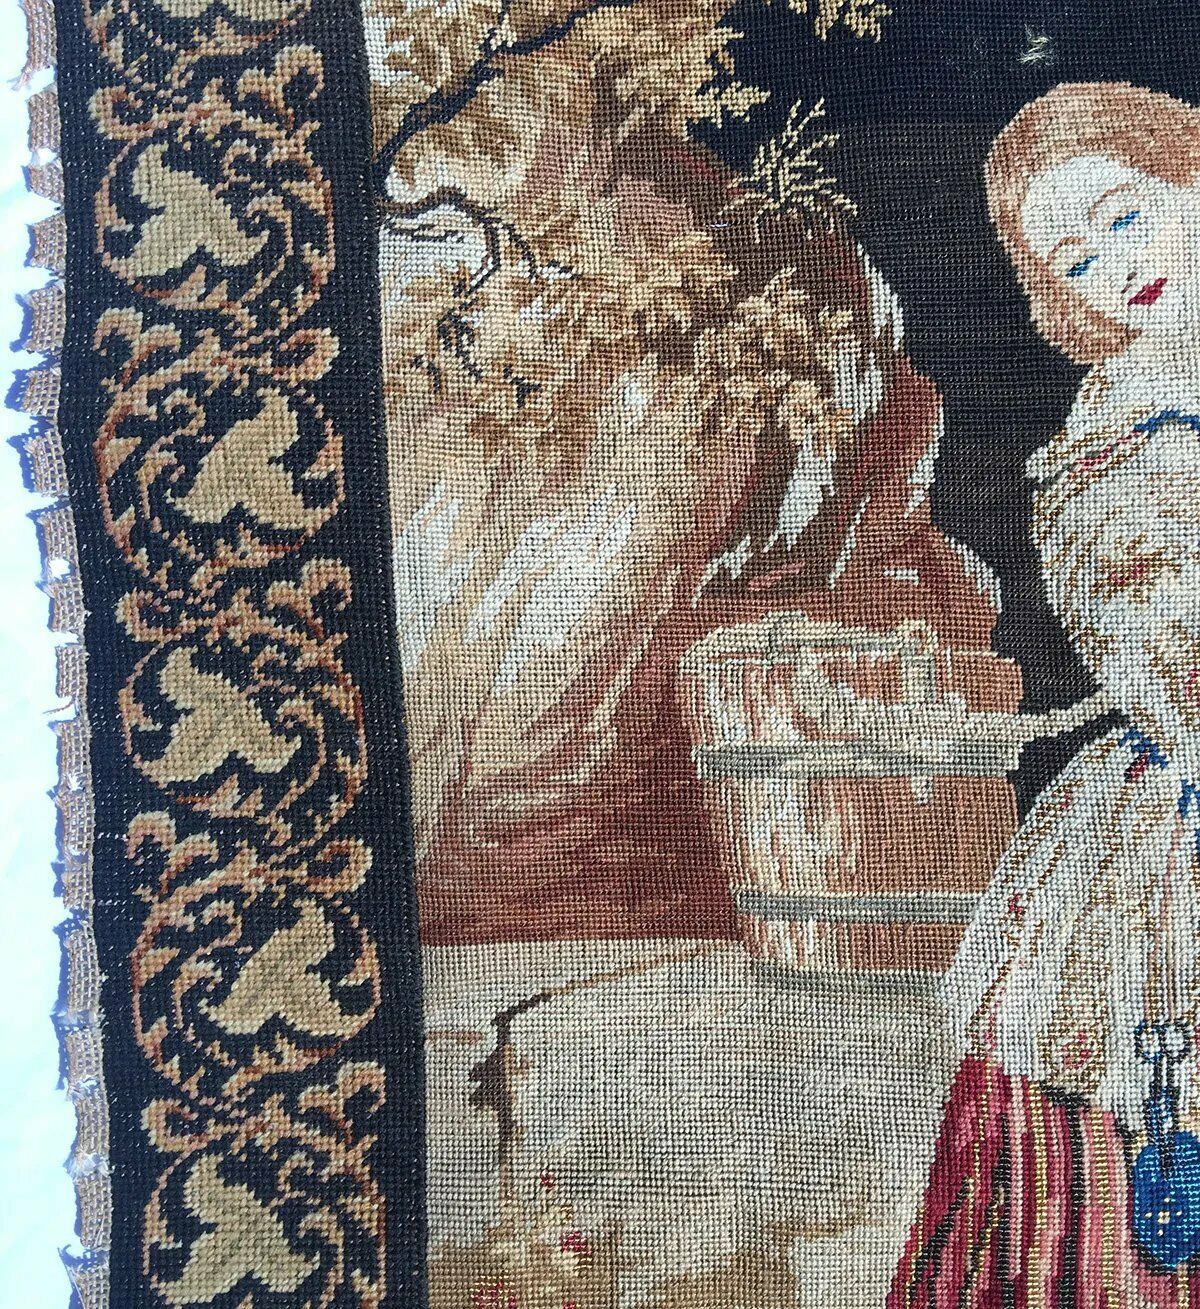 Huge 36" x 30" Early 1800s Antique Needlepoint Tapestry, Pettipoint Berlin Work